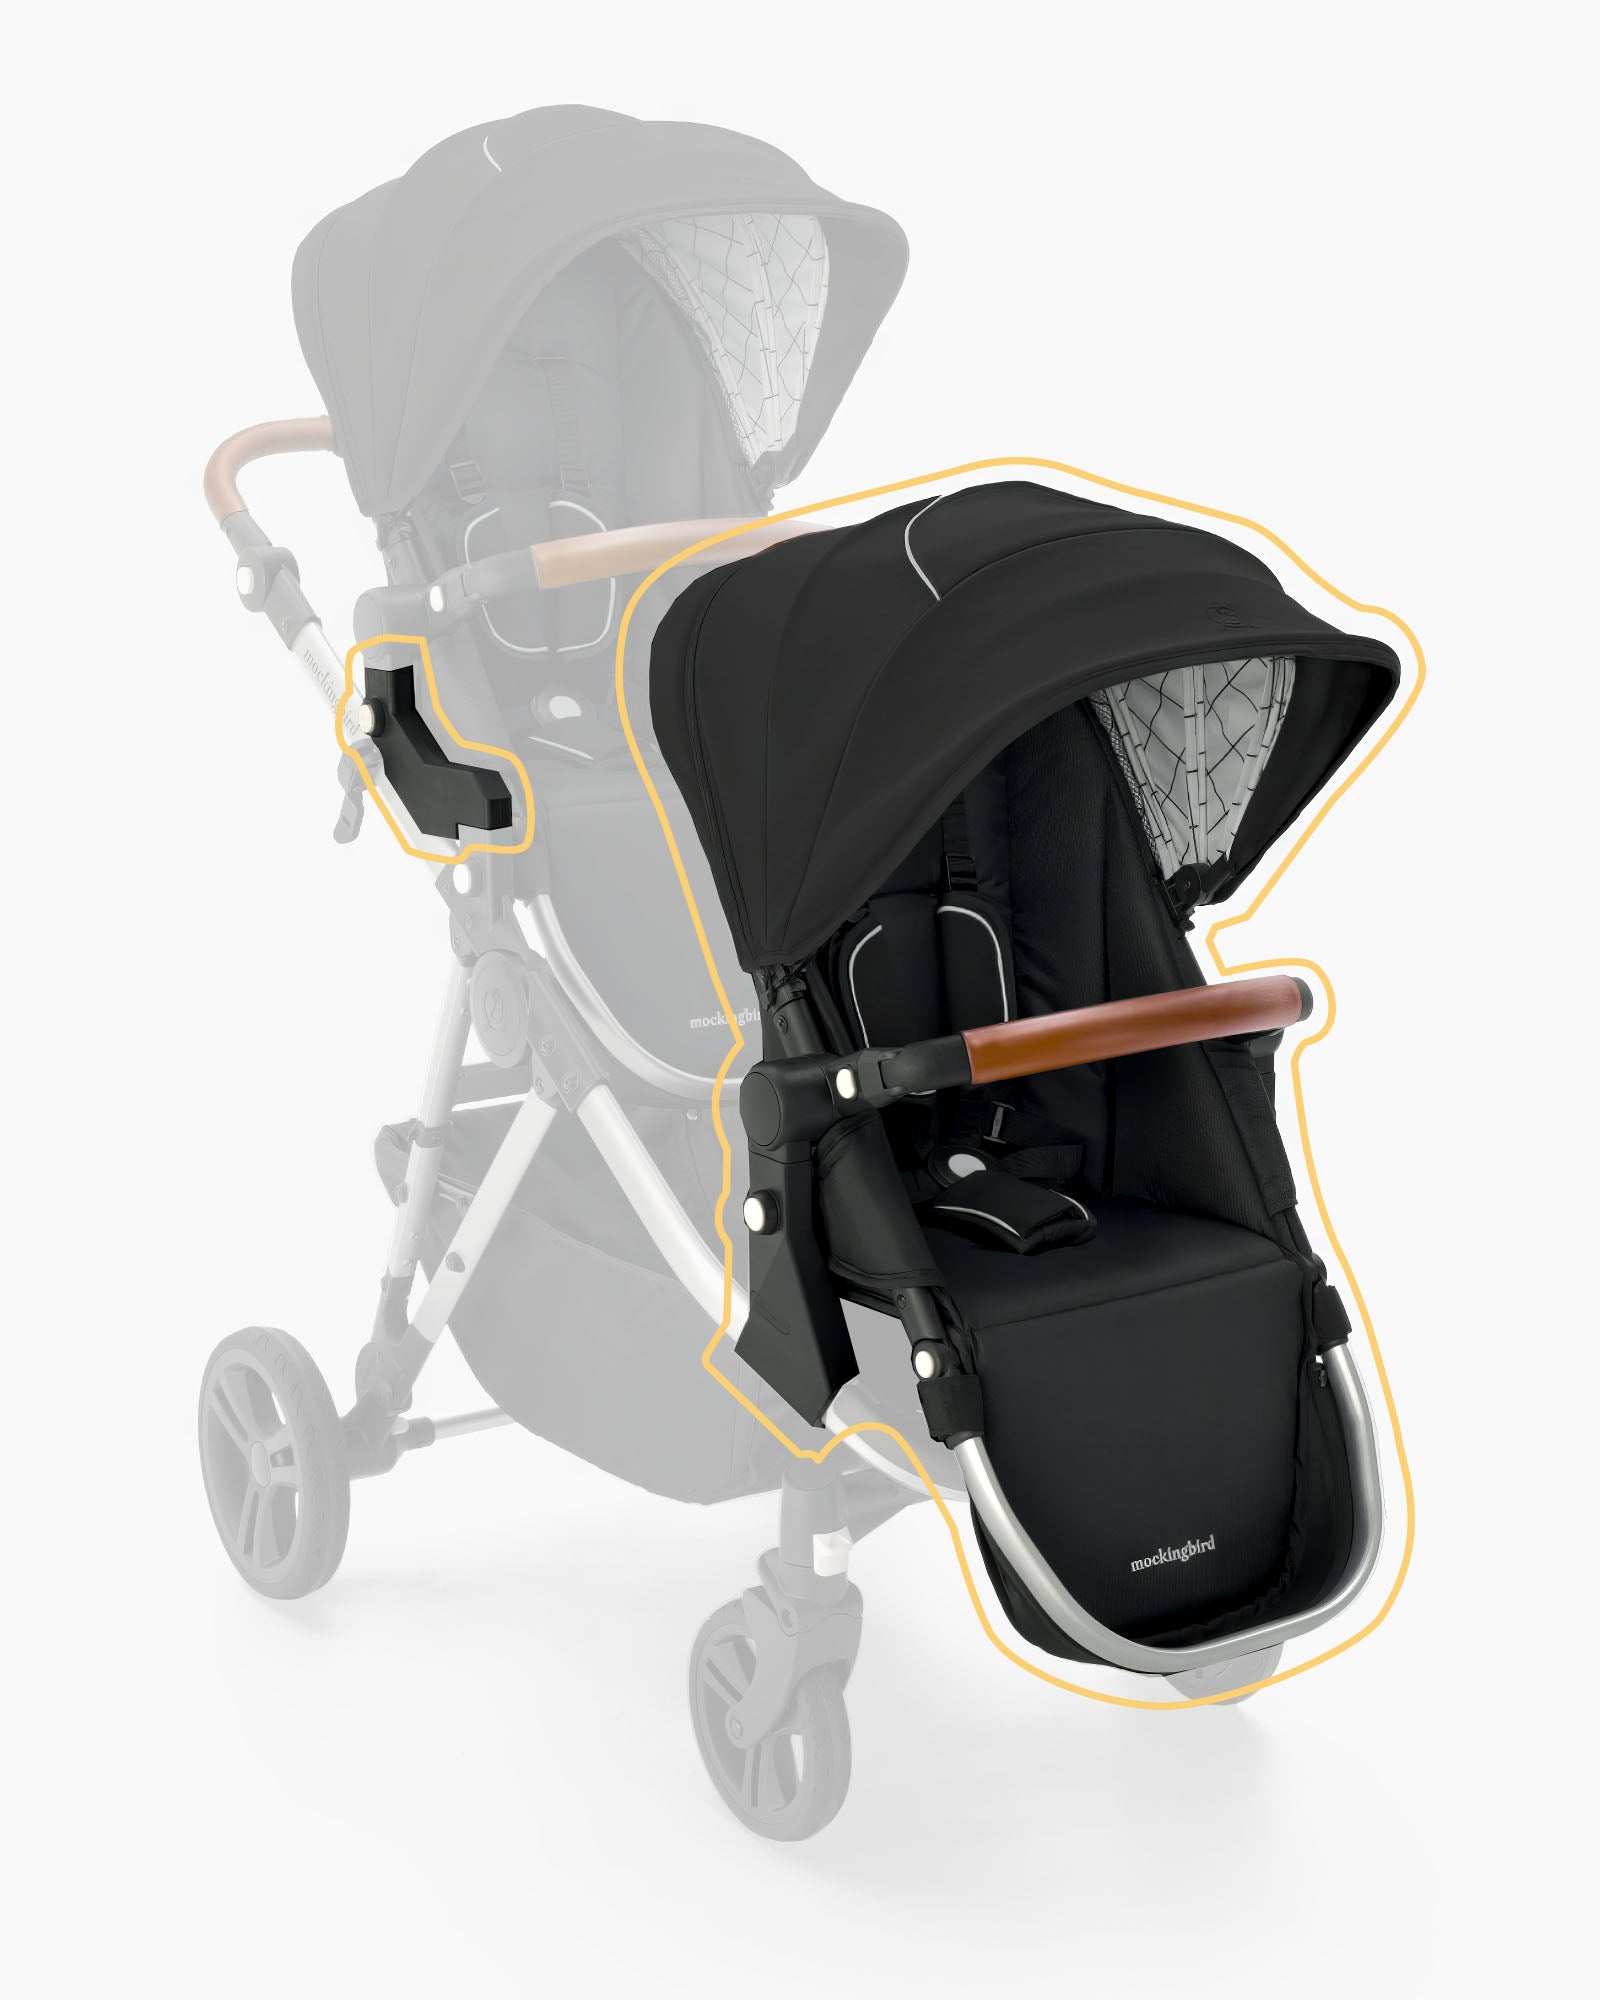 Modern black single-to-double baby stroller with adjustable handle and extendable canopy, featuring a stylish design with light grey accents and wooden elements, shown in a side and front angled view, by mockingbird. #color_black